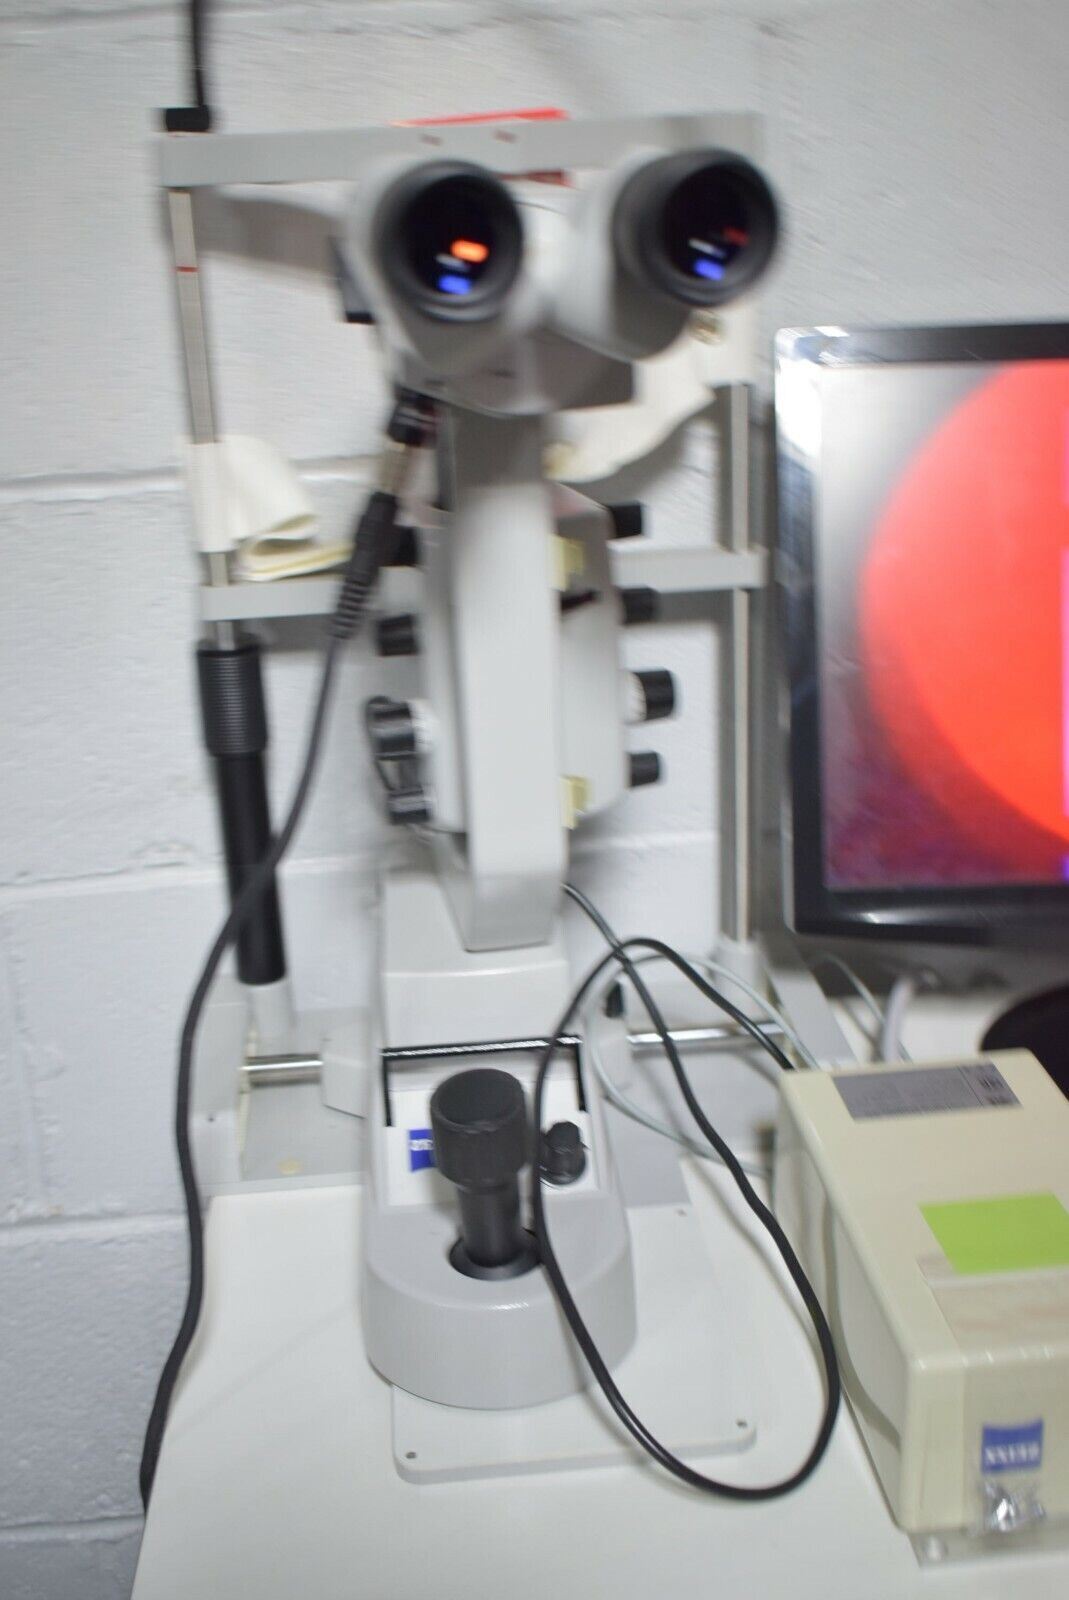 Zeiss slitlamp and microscope video system